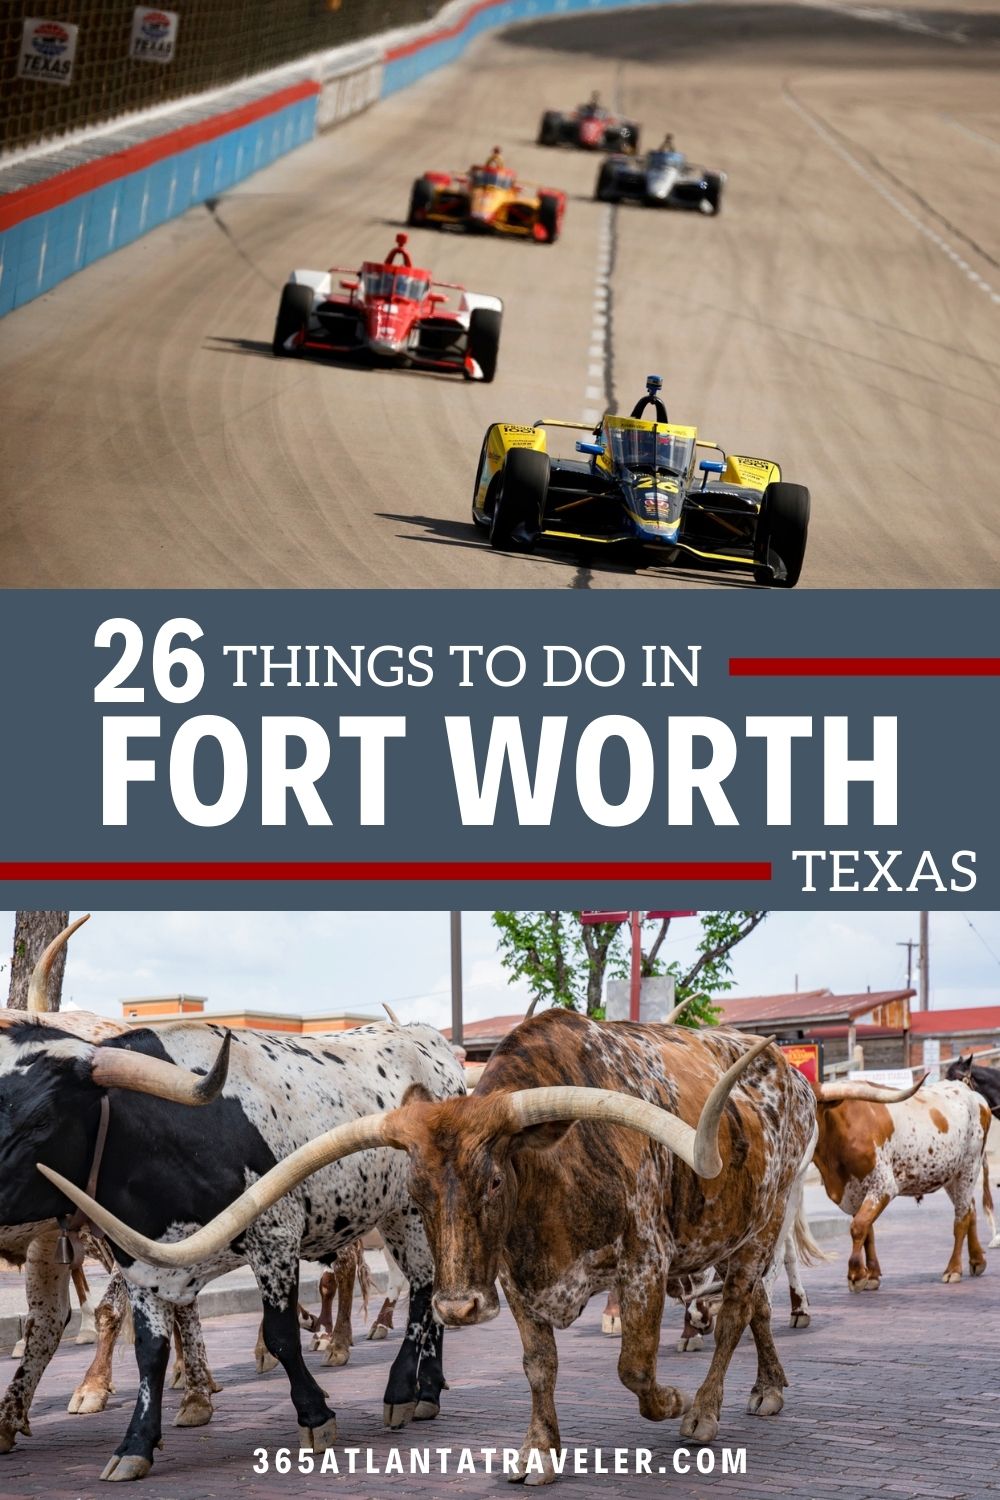 26 OUTSTANDING THINGS TO DO IN FORT WORTH, TEXAS